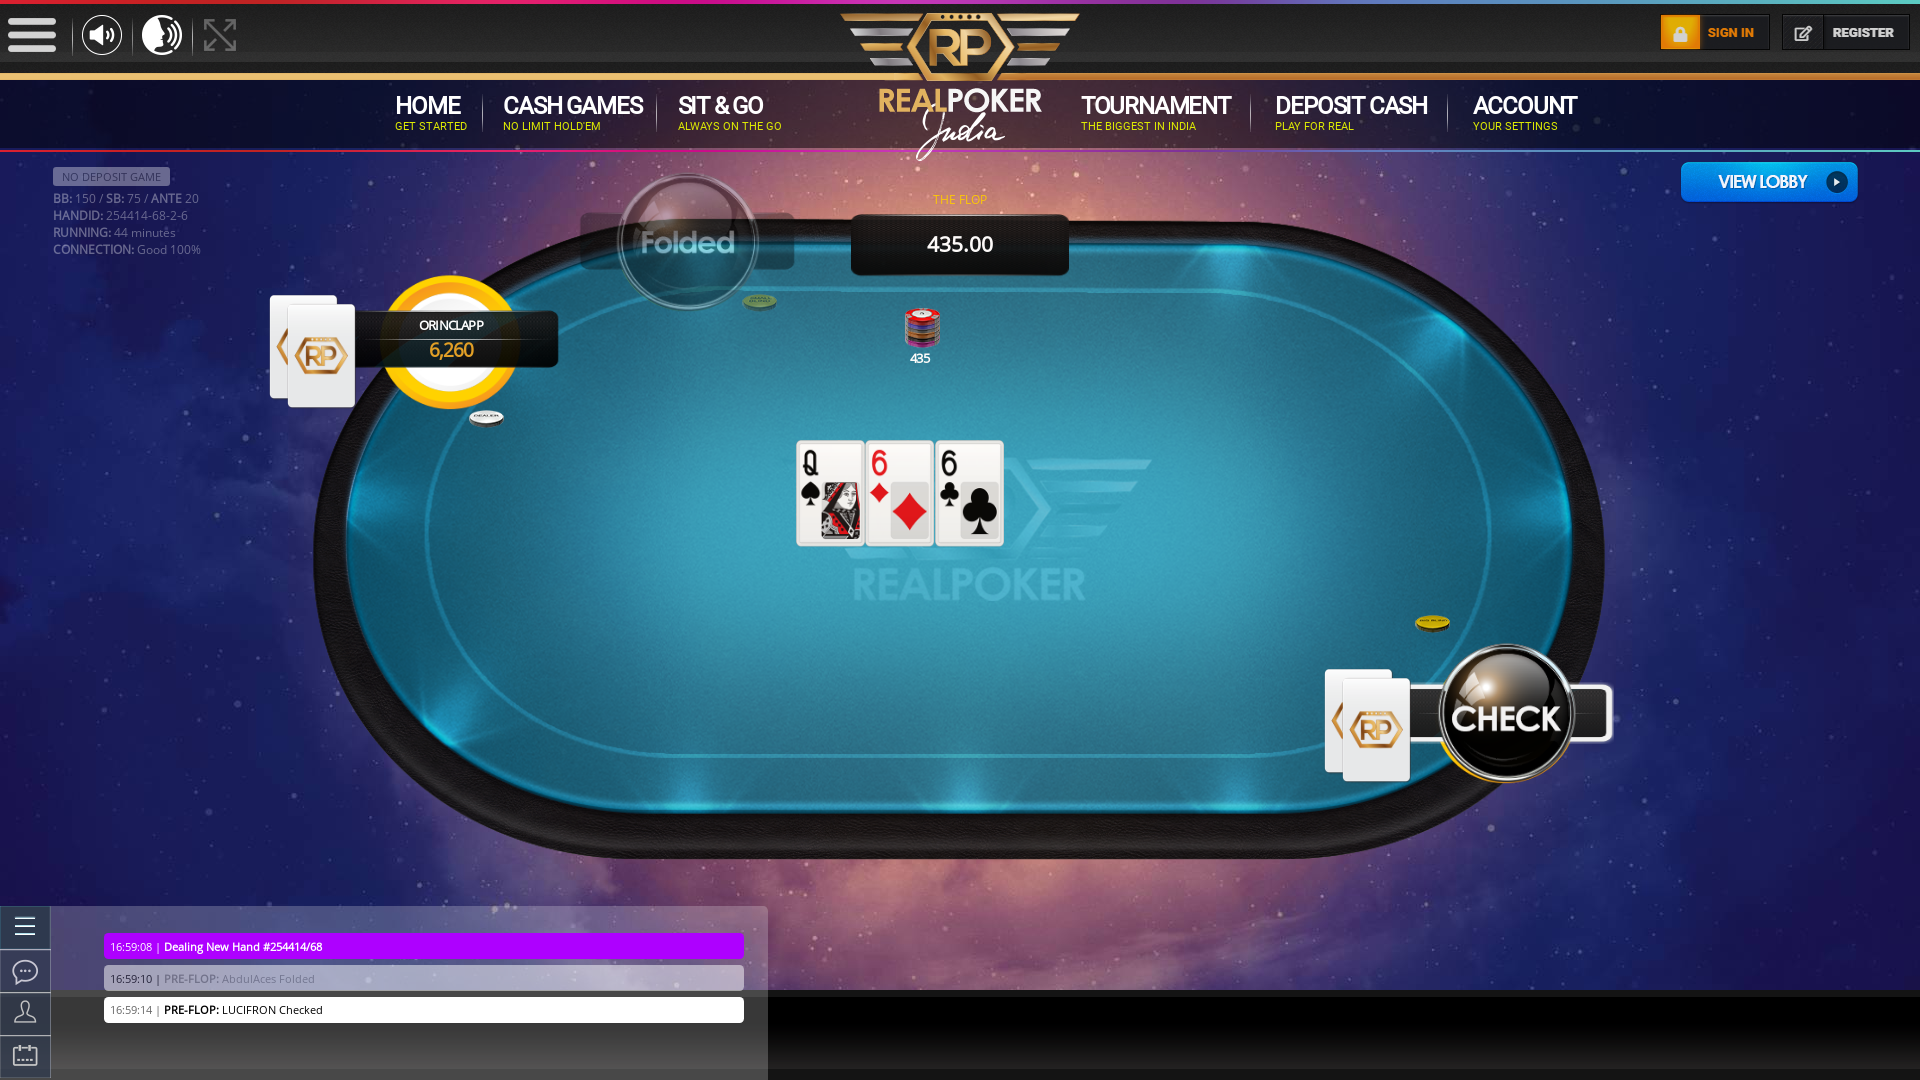 Real Indian poker on a 10 player table in the 43rd minute of the game